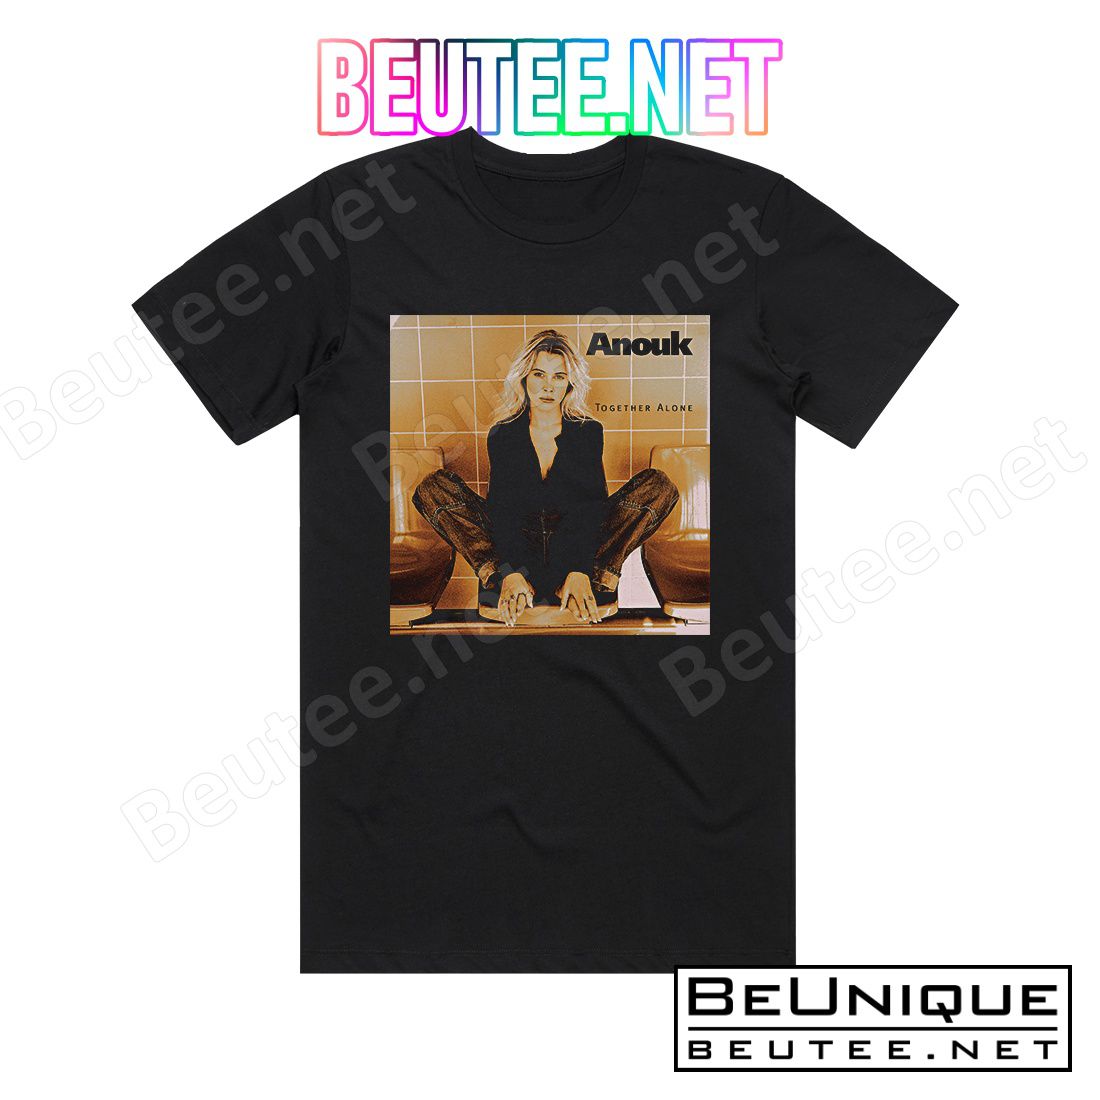 Anouk Together Alone 1 Album Cover T-Shirt